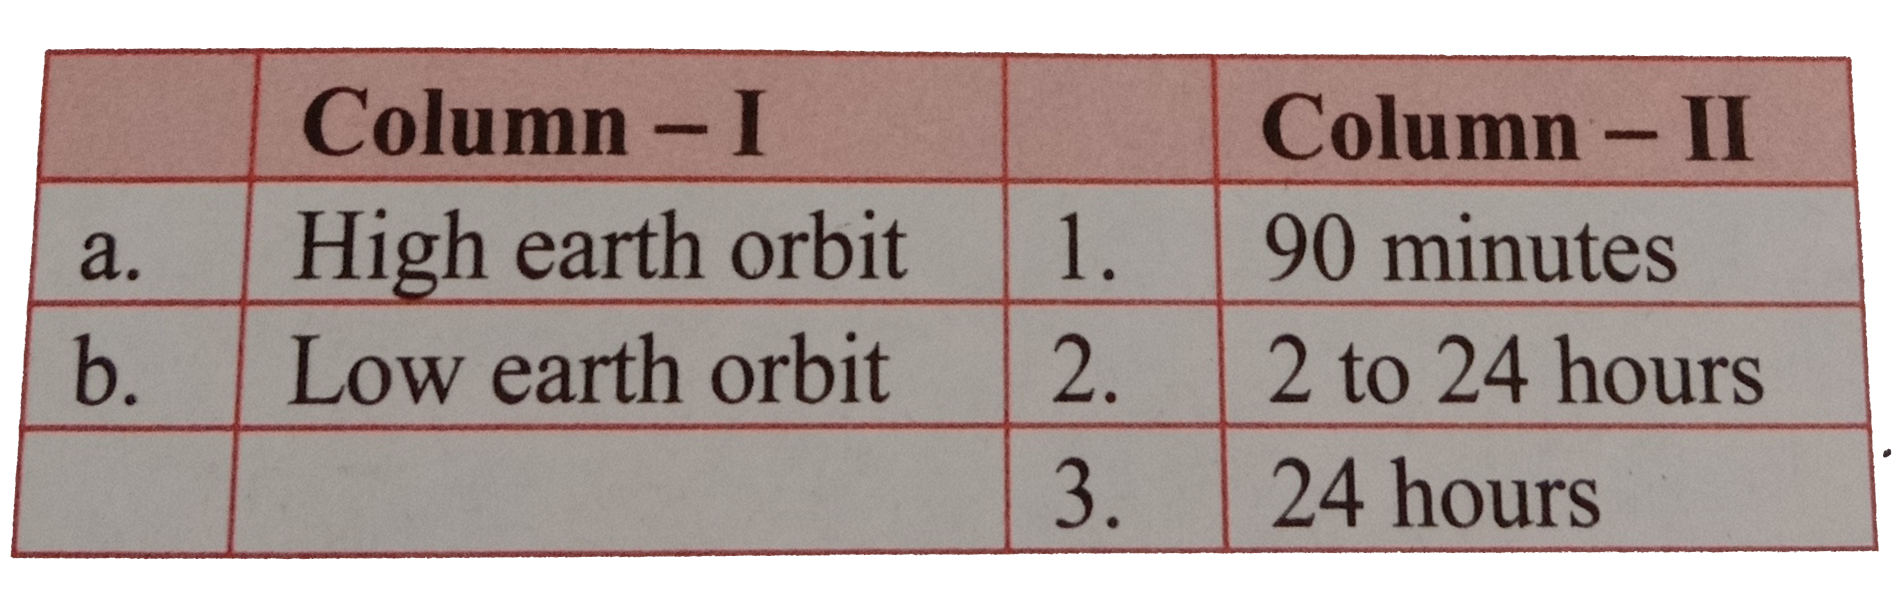 Match the satellite orbits given in column -I with the corresponding time periods of satellite in column-II